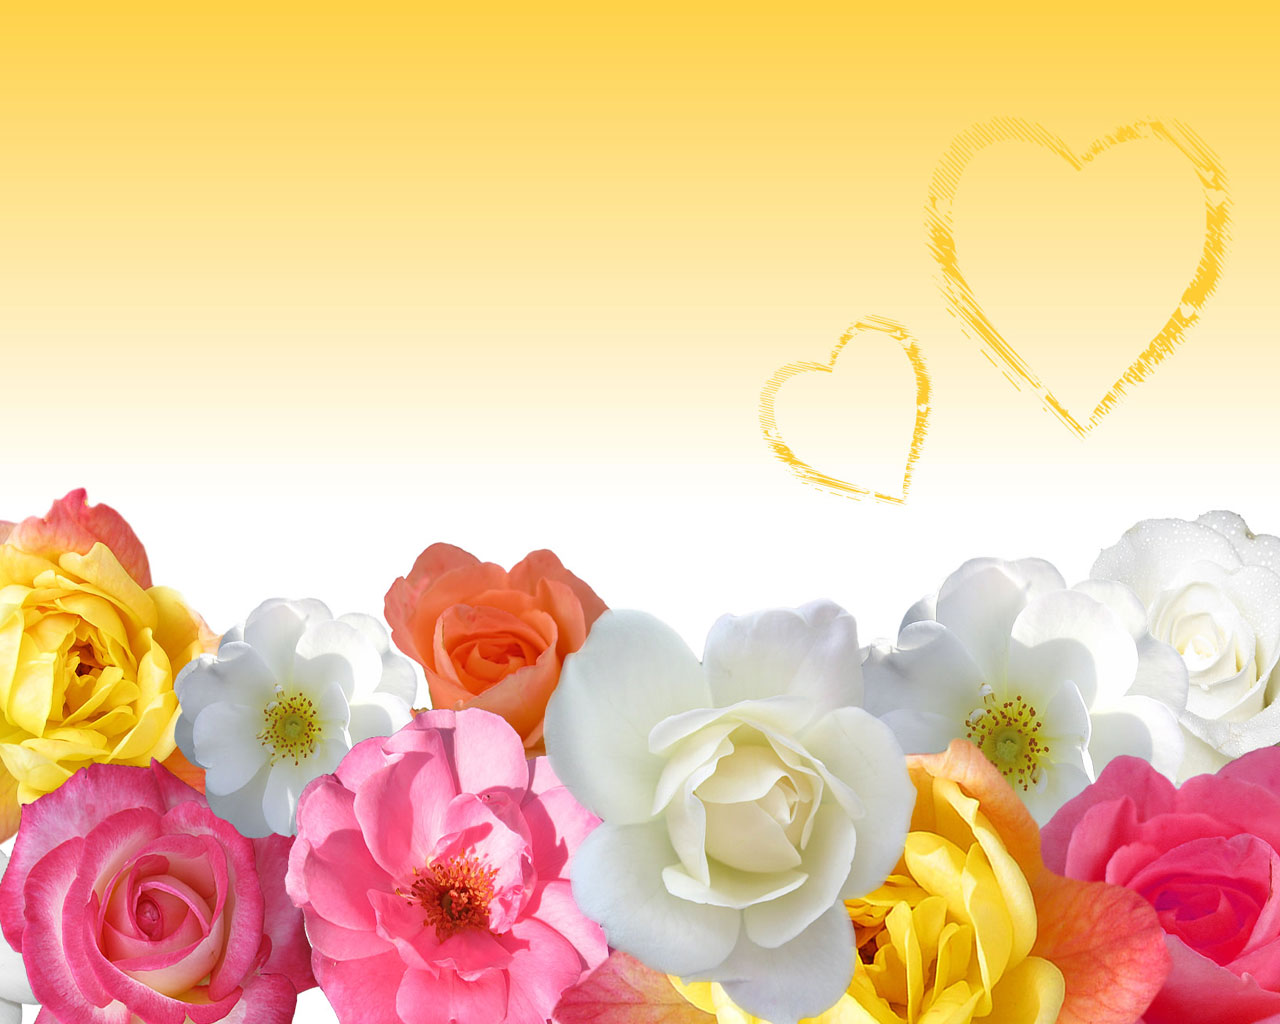 Romantic Valentine Fowers Backgrounds powerpoint backgrounds